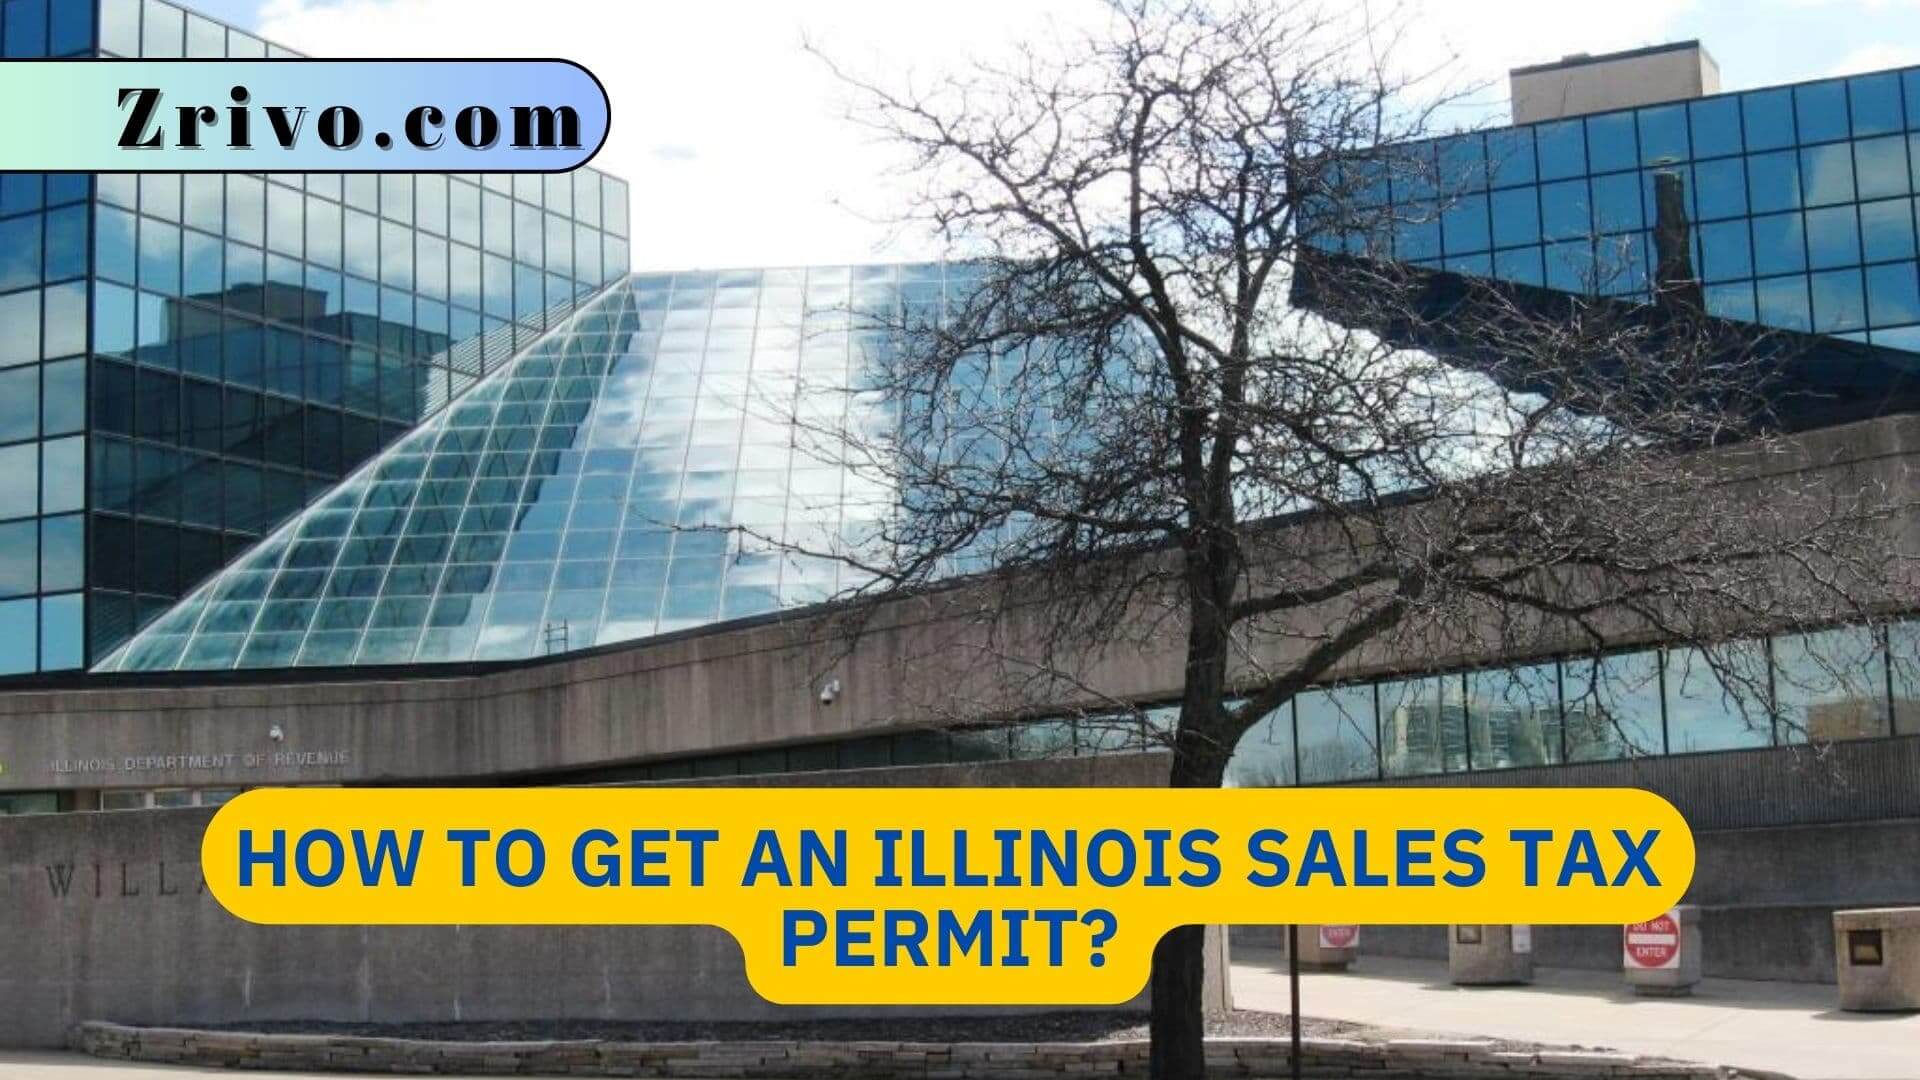 How to Get an Illinois Sales Tax Permit